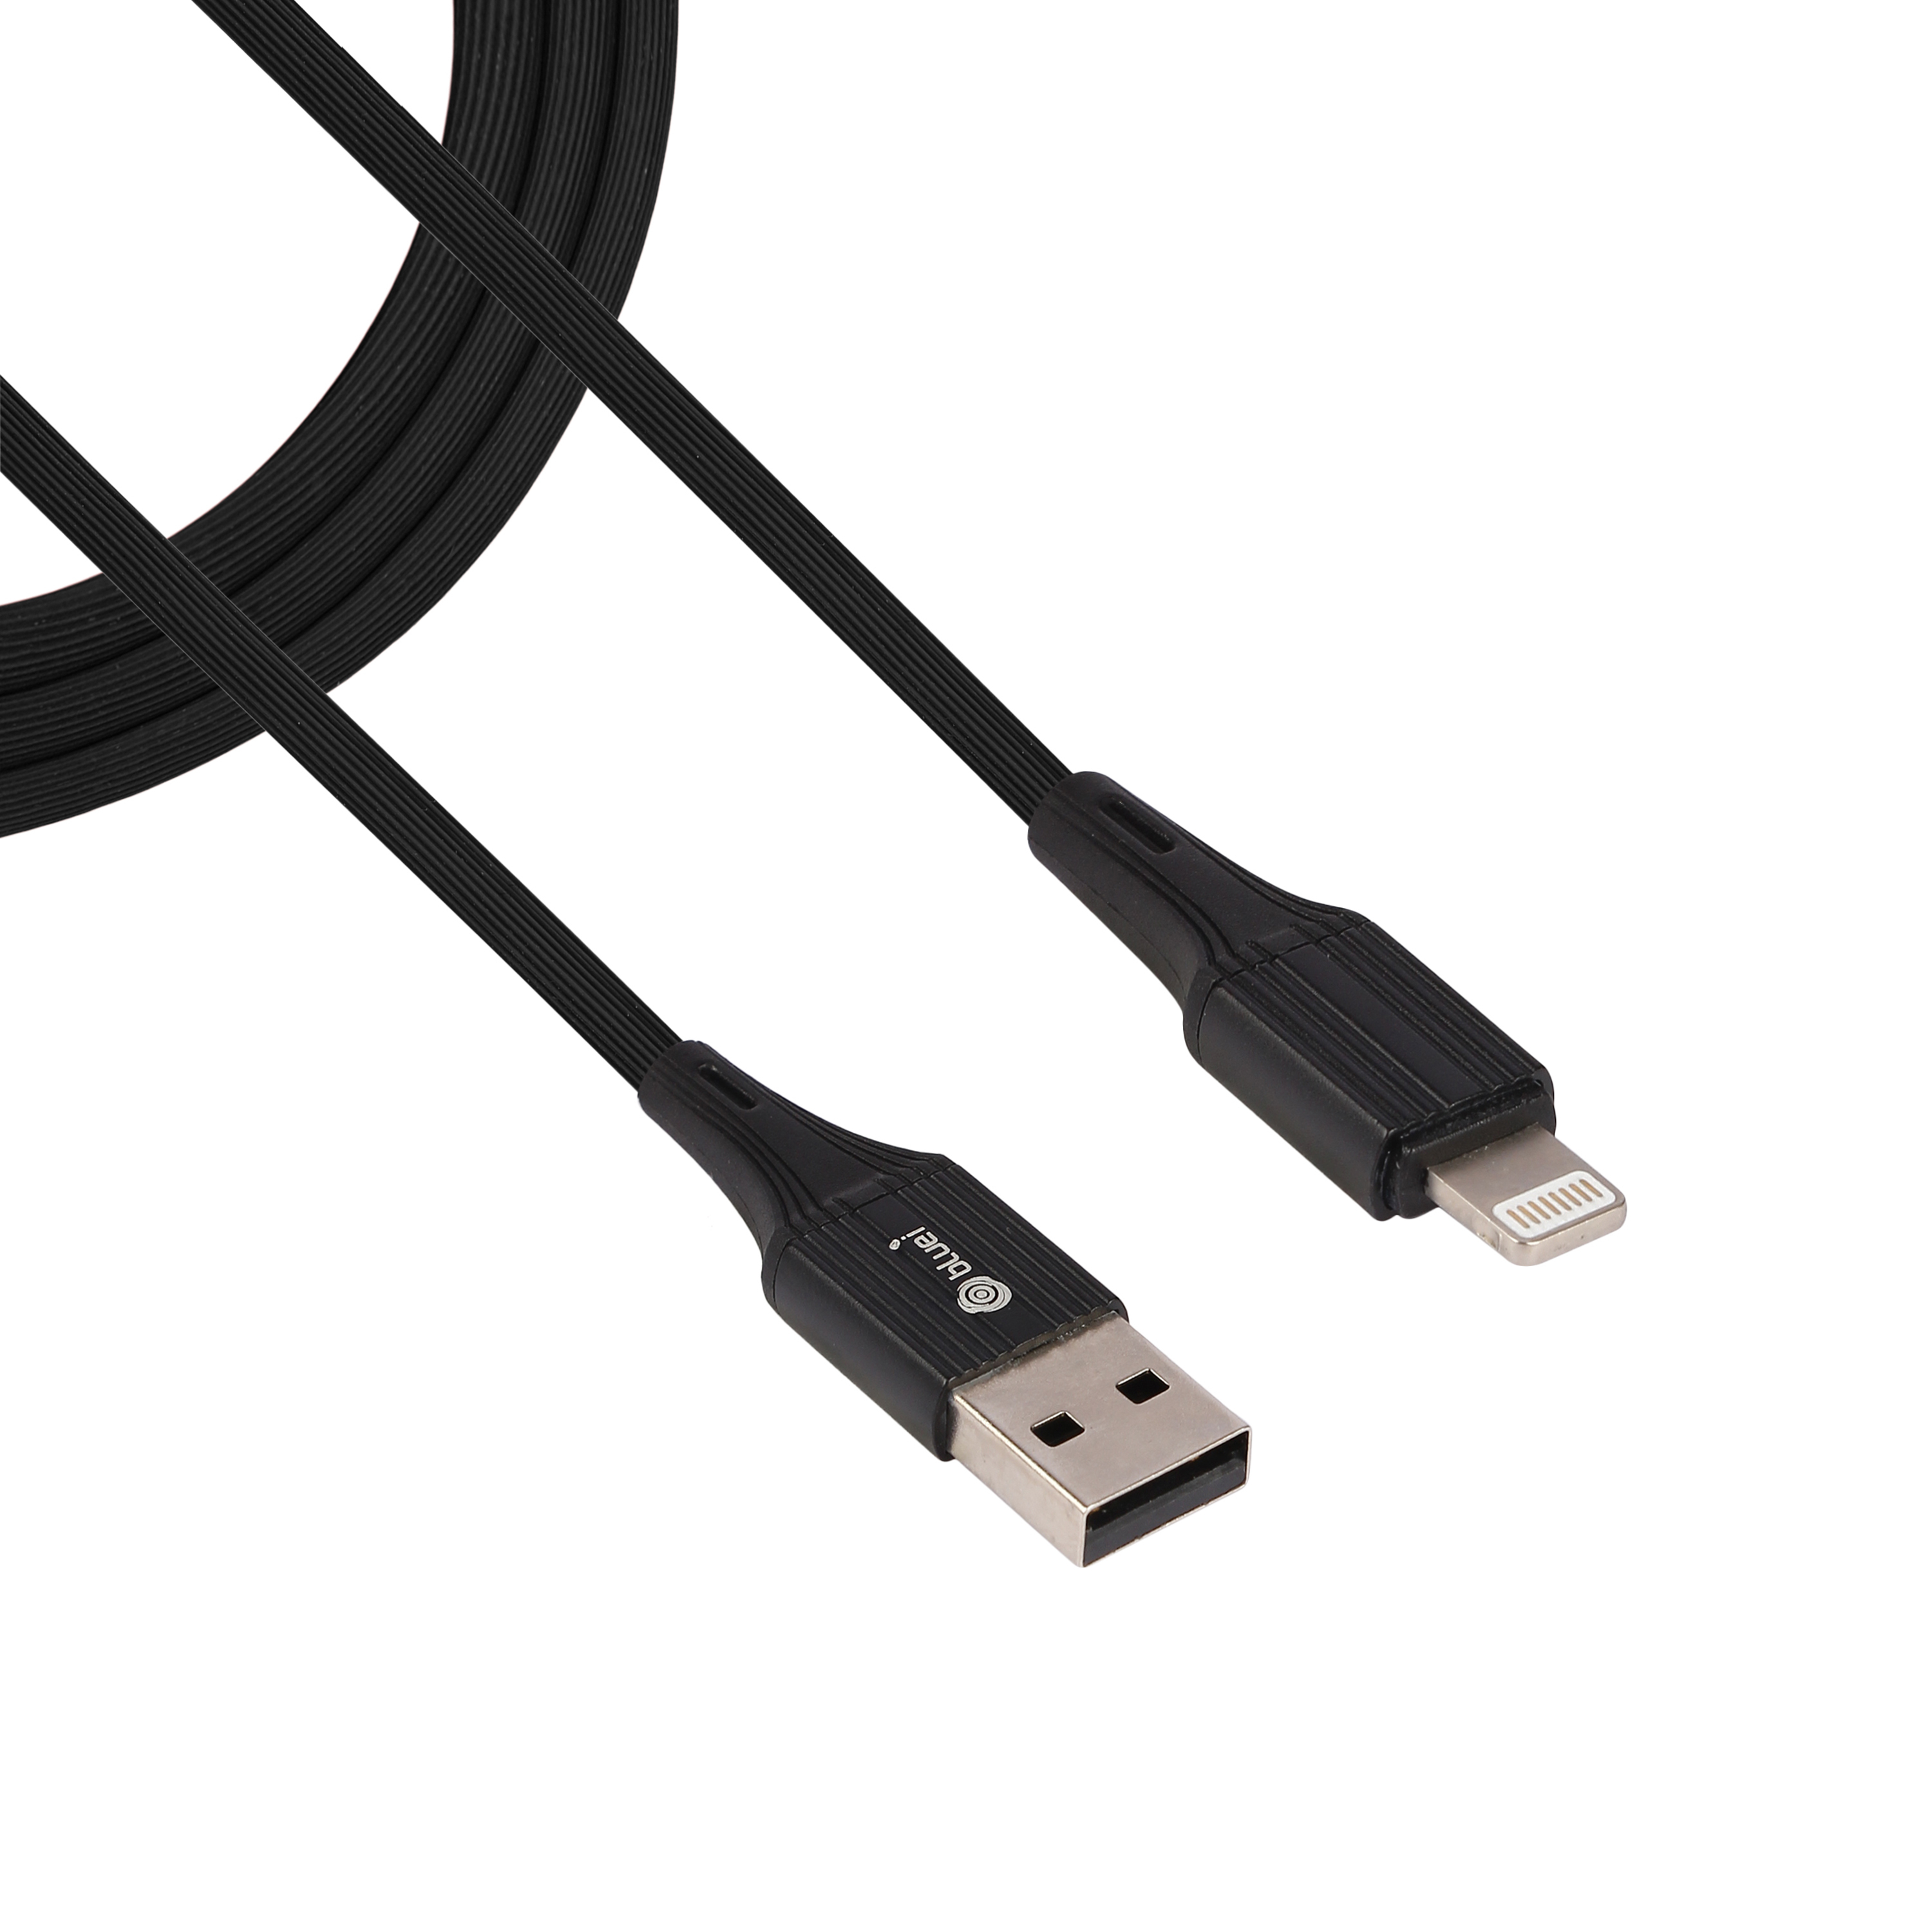 Dc-x11 2.4 Amp Iphone Fast Bluei Data Cable